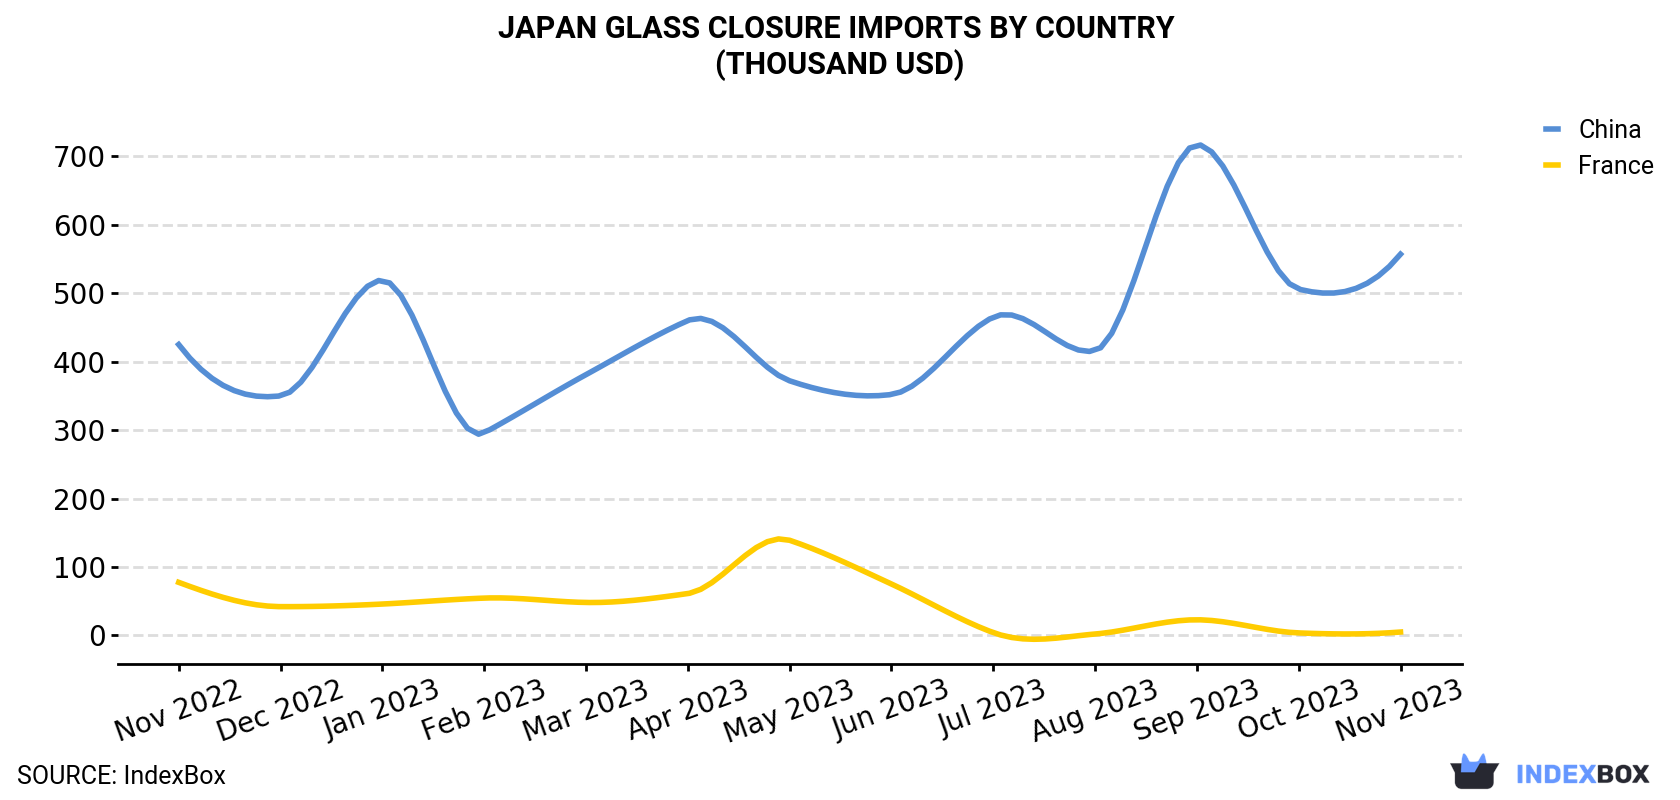 Japan Glass Closure Imports By Country (Thousand USD)